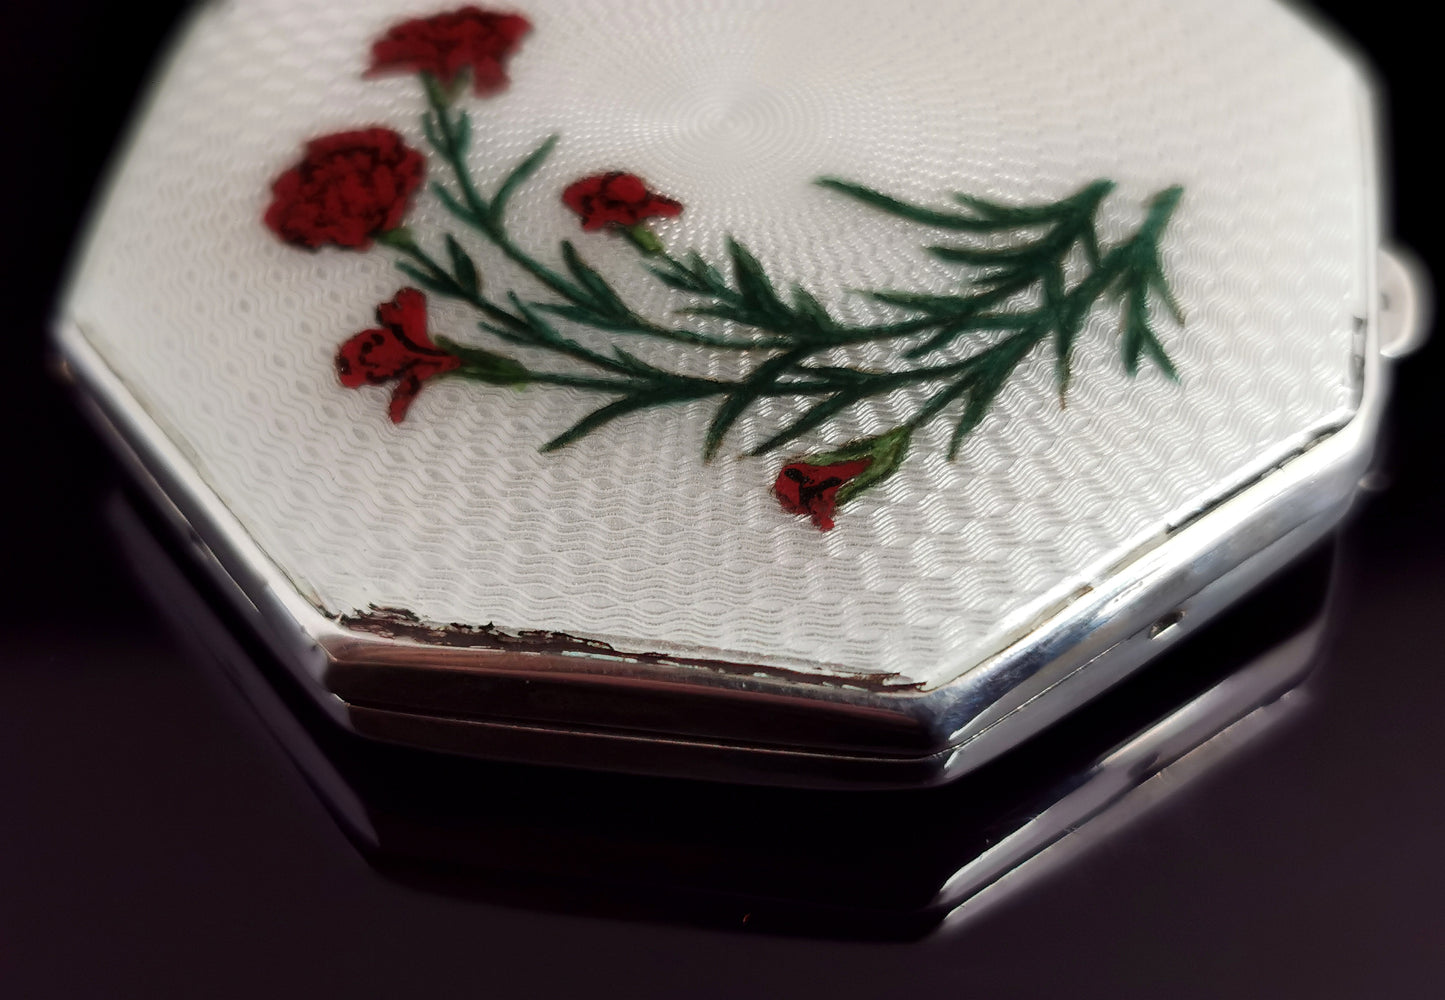 Vintage Art Deco silver and enamel compact, carnations